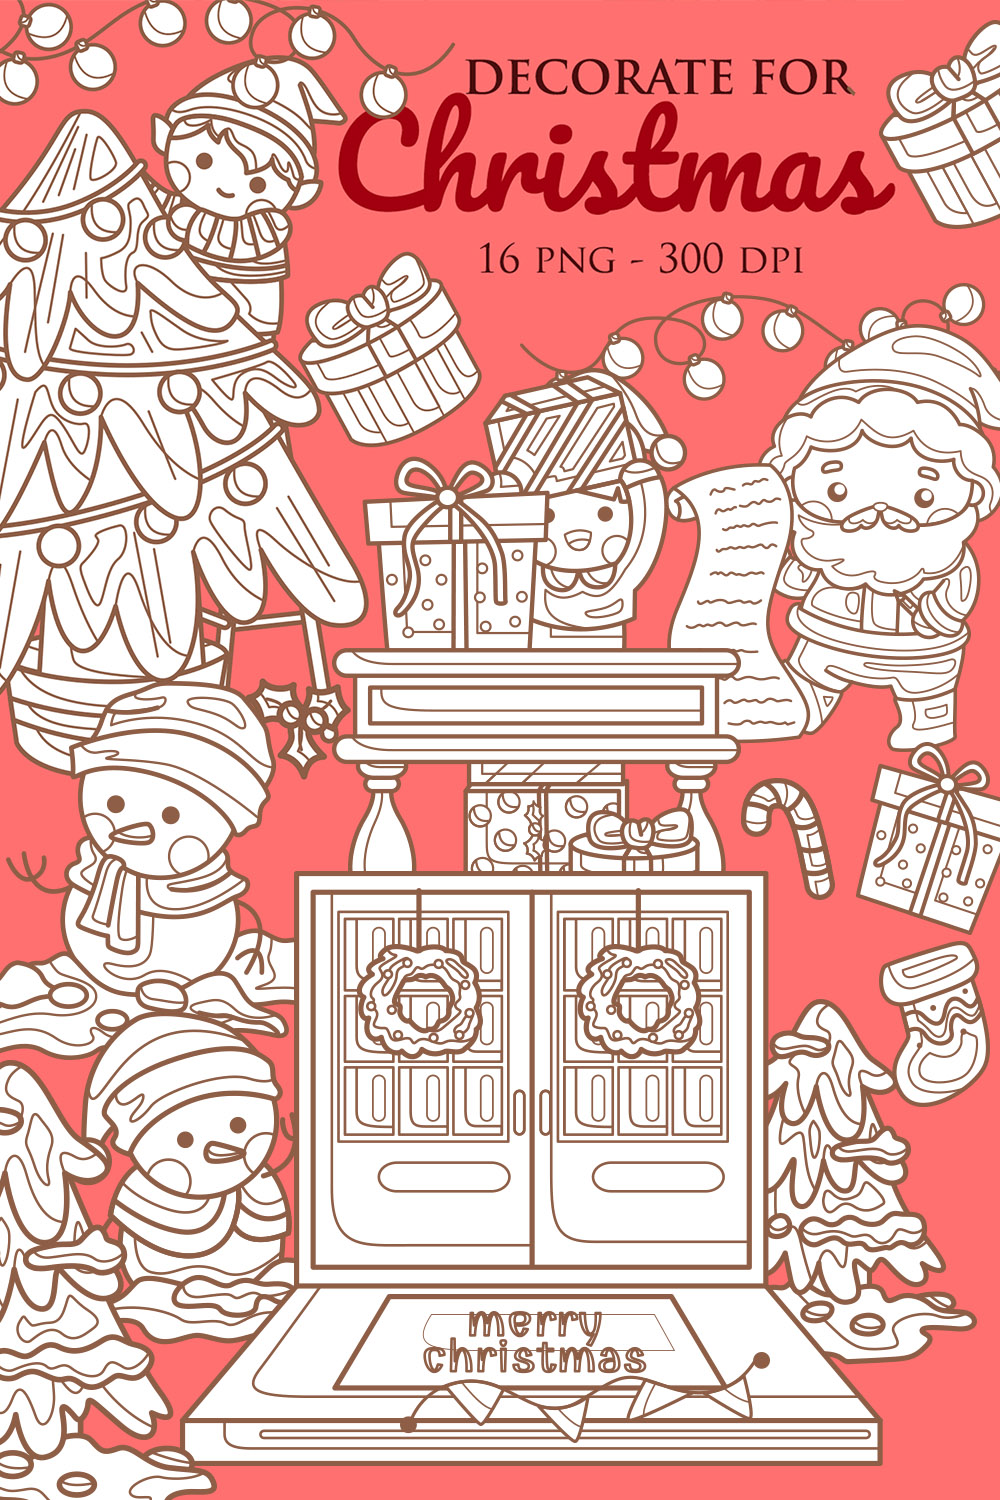 Decorated for Christmas Character Snowman Santa Claus Elf Holiday Decoration Background Cartoon Digital Stamp Outline pinterest preview image.